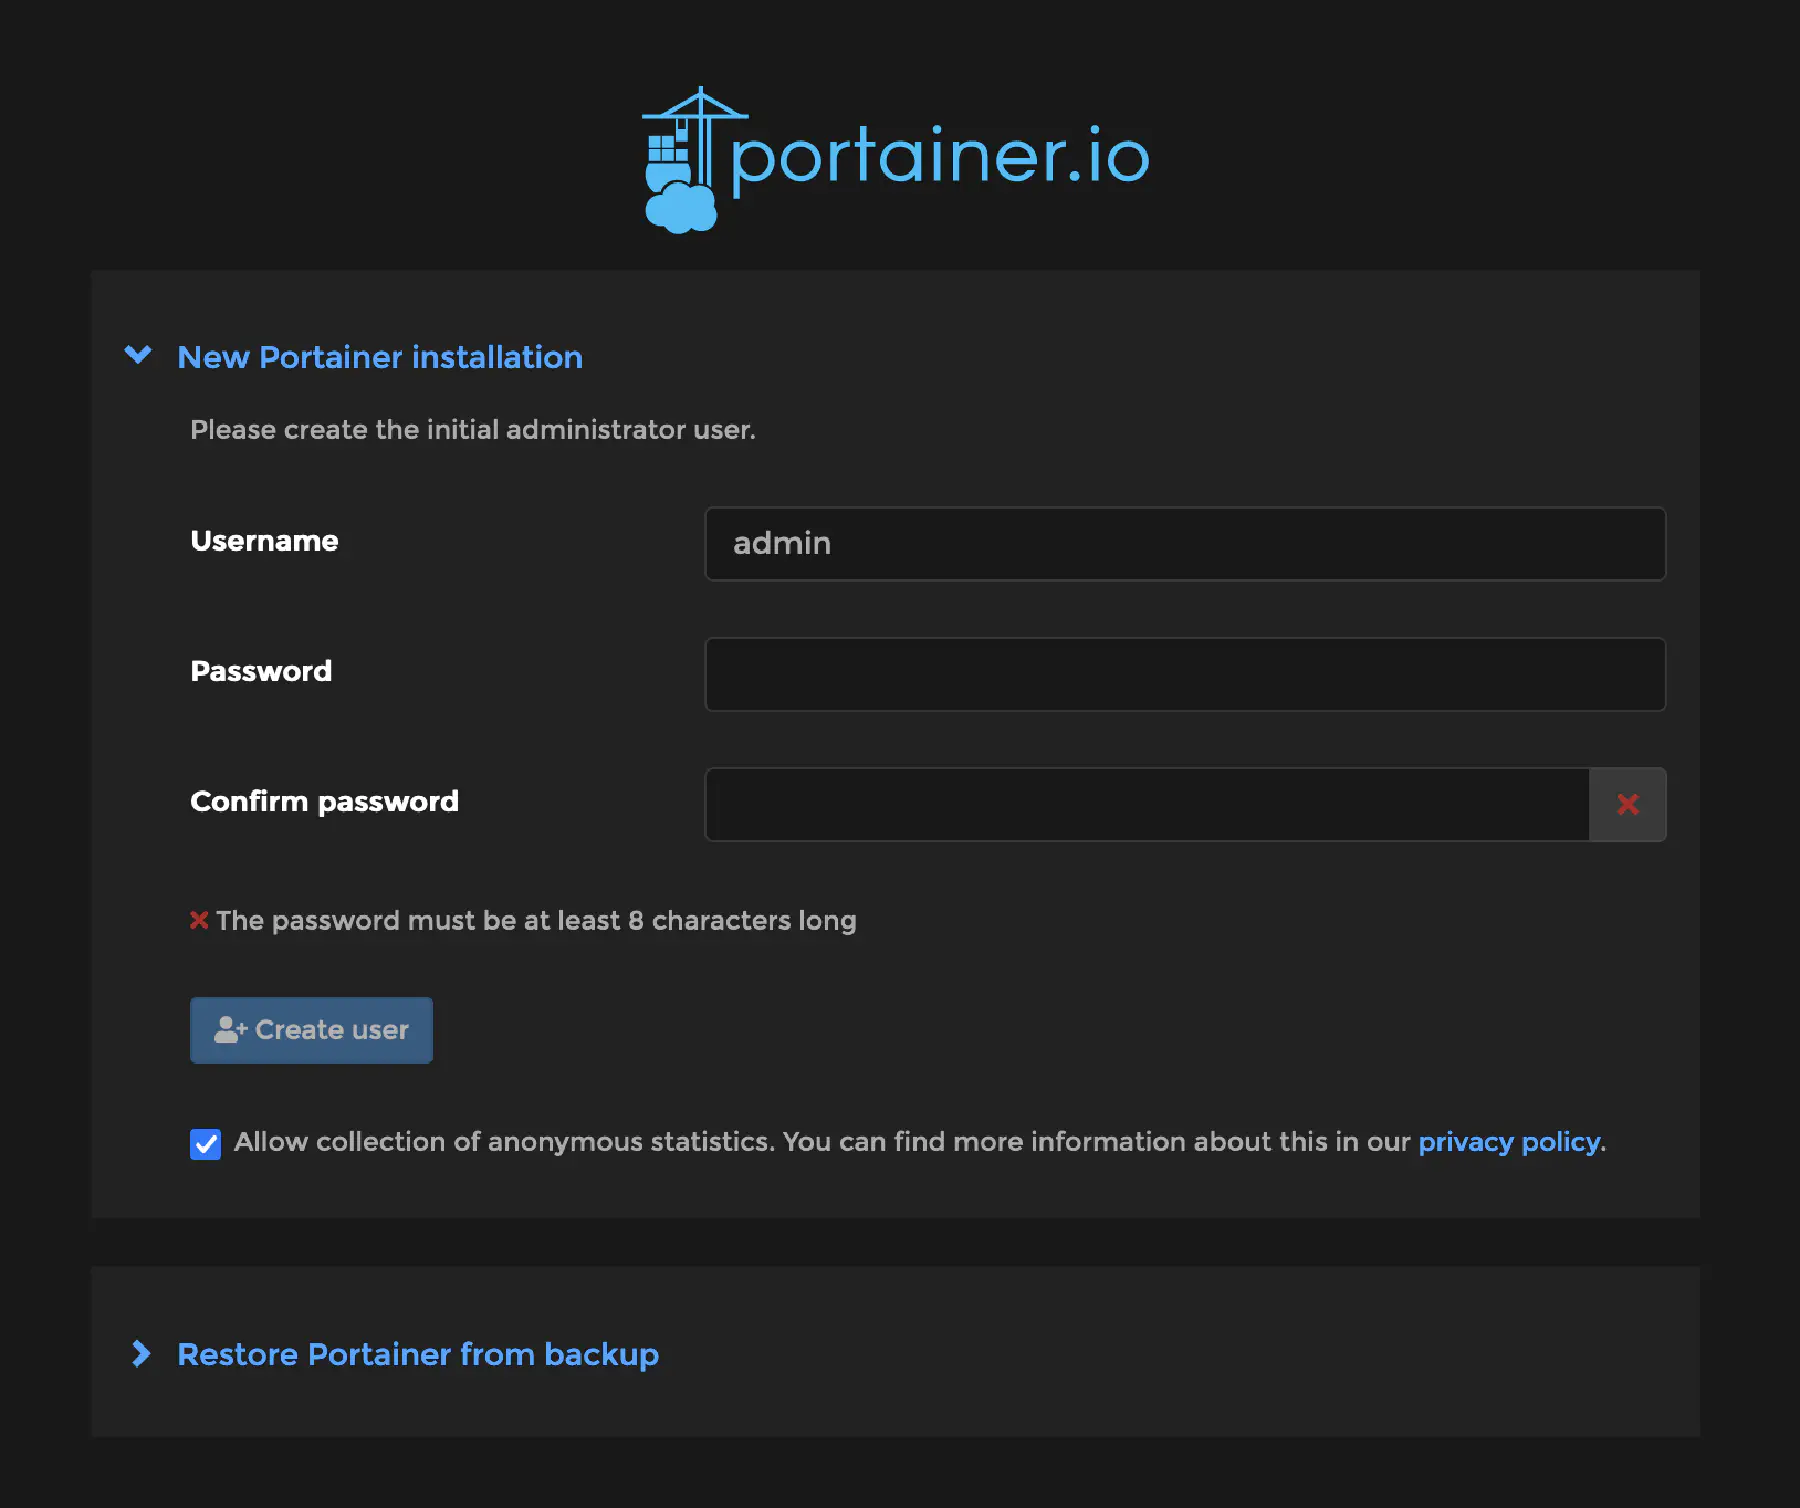 The setup screen of Portainer